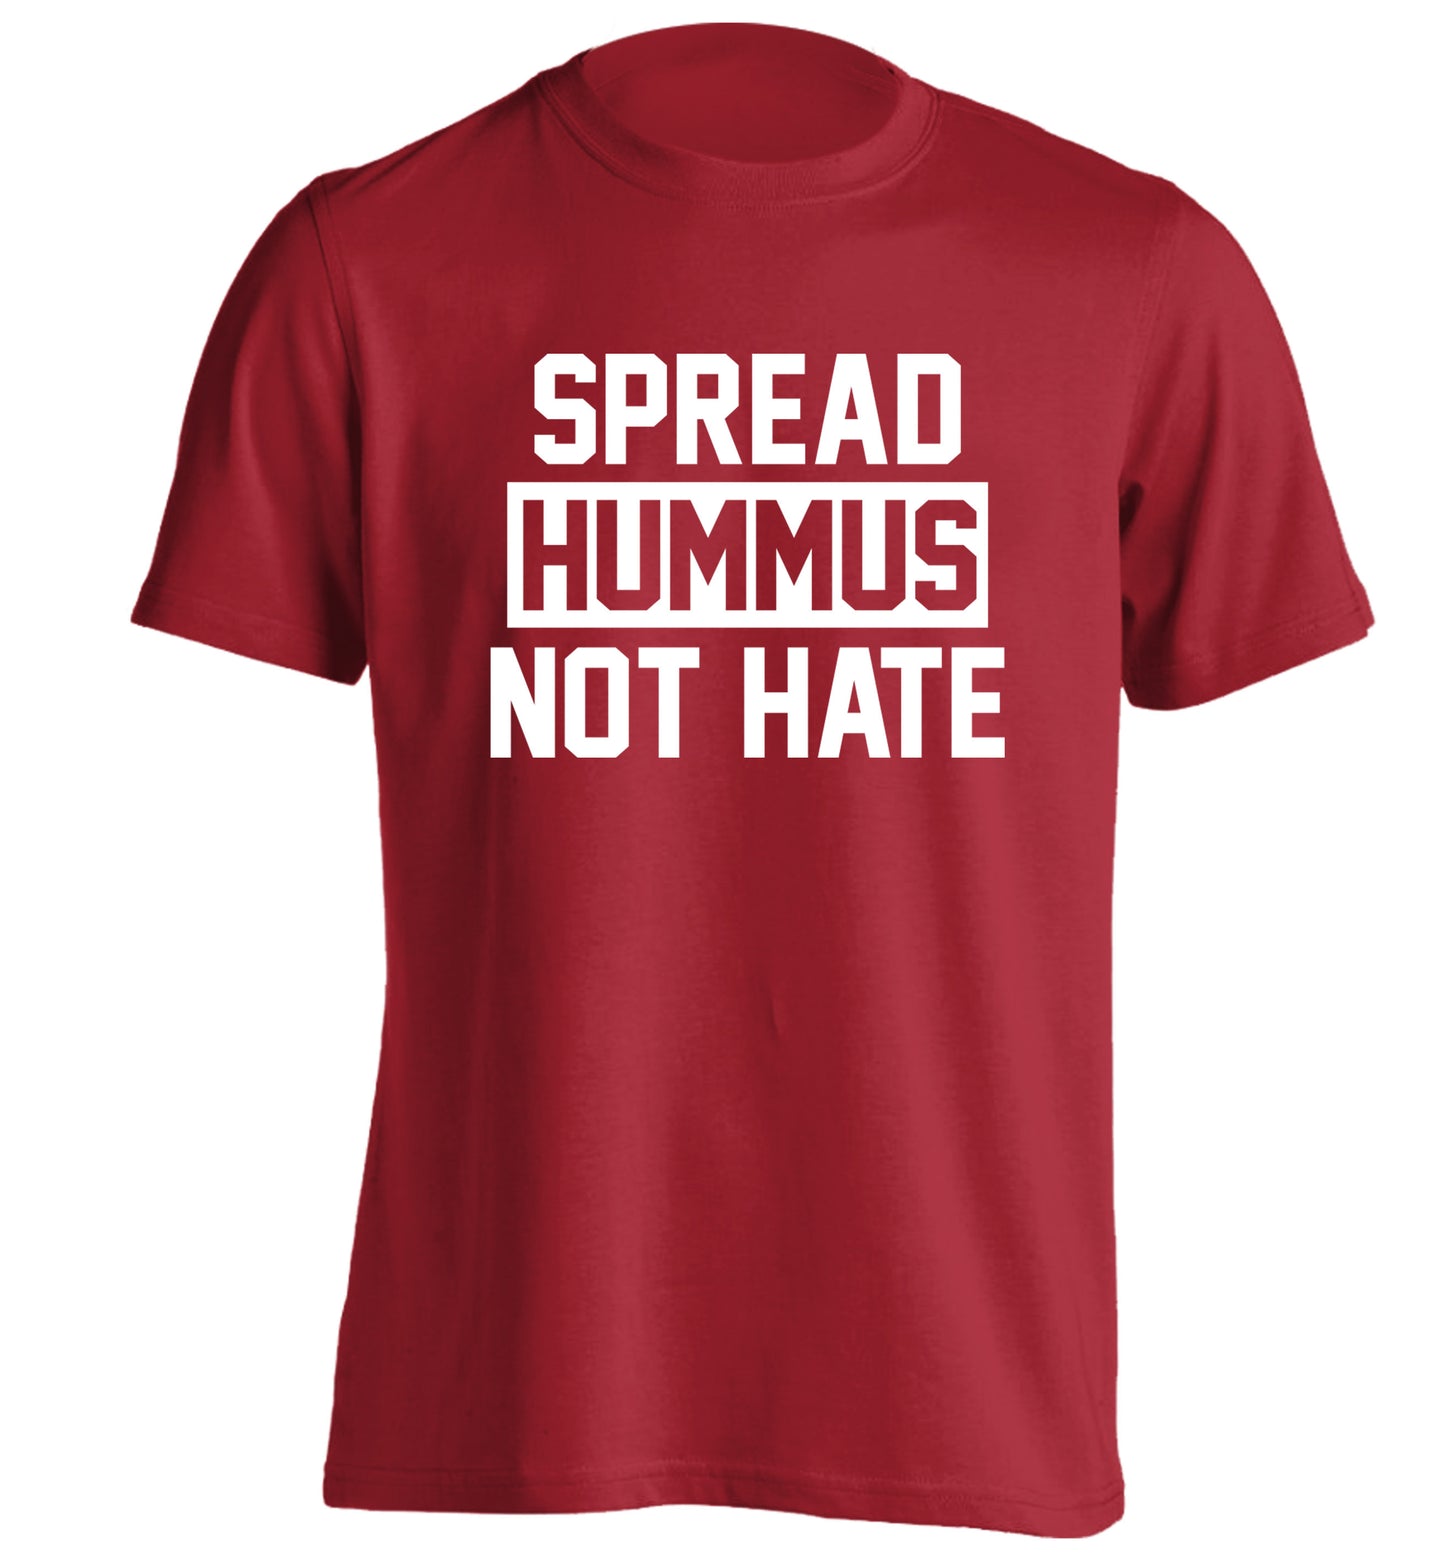 Spread hummus not hate adults unisex red Tshirt 2XL